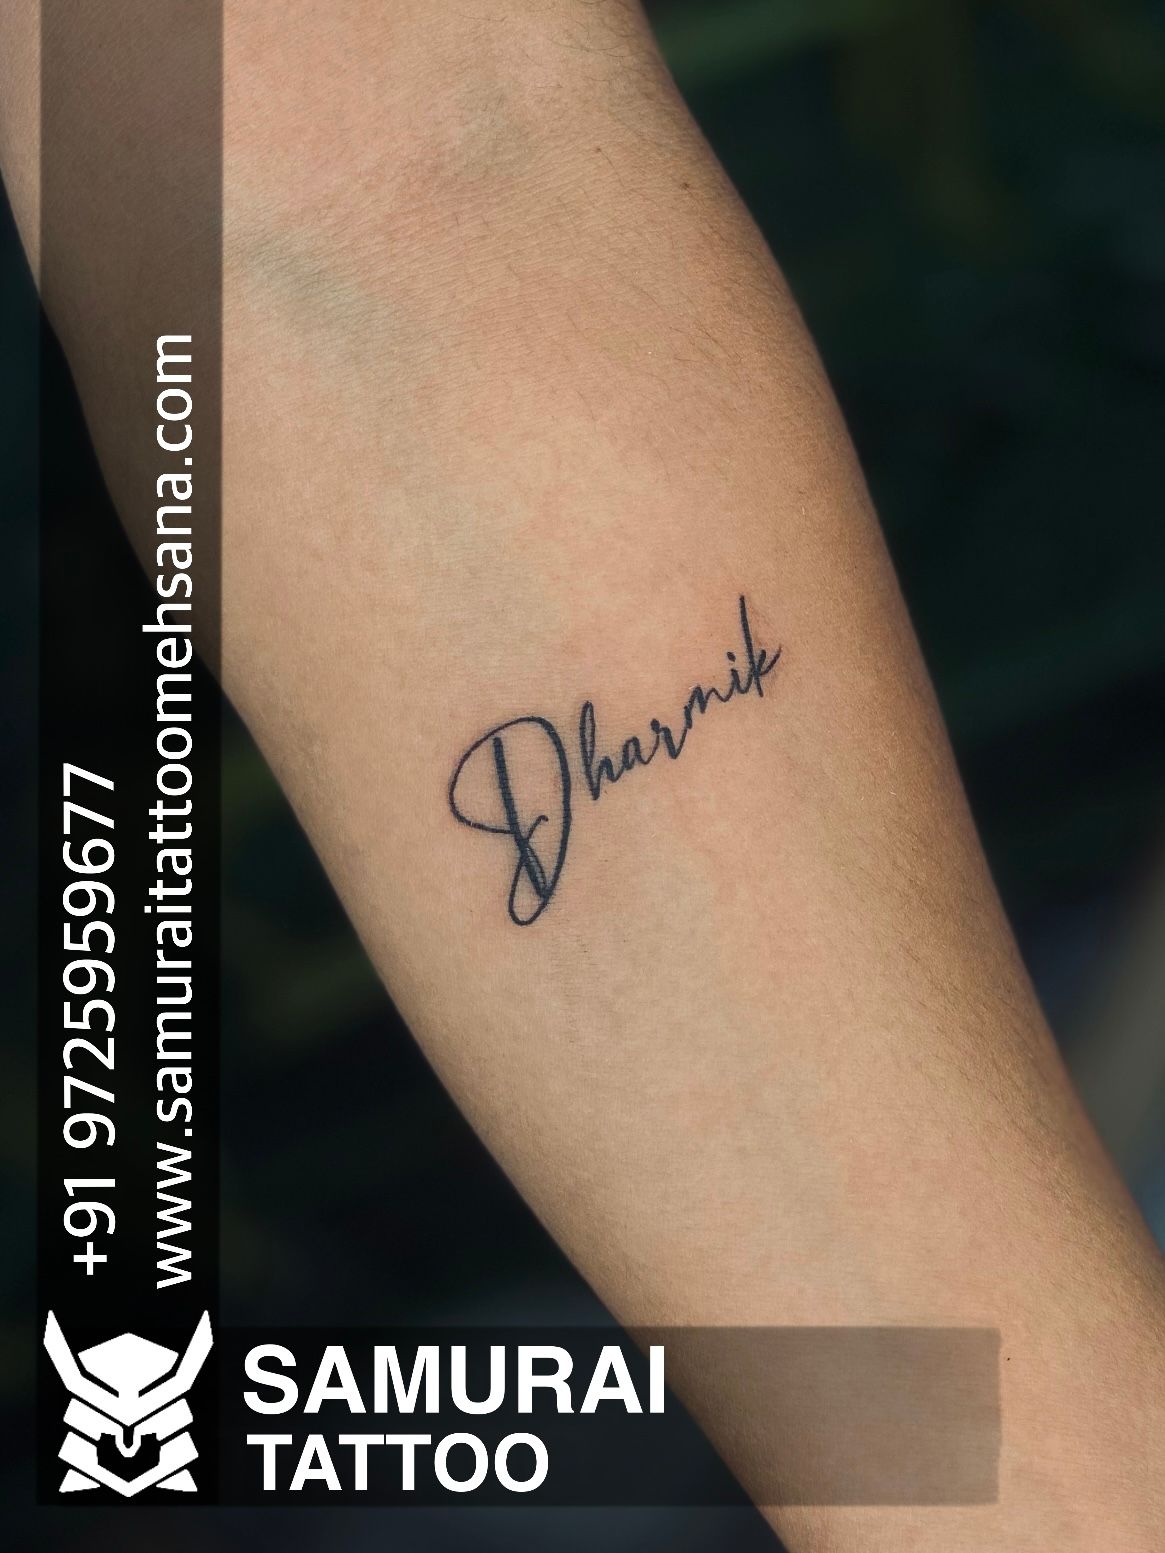 Girlfriend looking for name of this font (her in image) for a new tattoo,  anyone know the name of it? Thanks in advance : r/identifythisfont